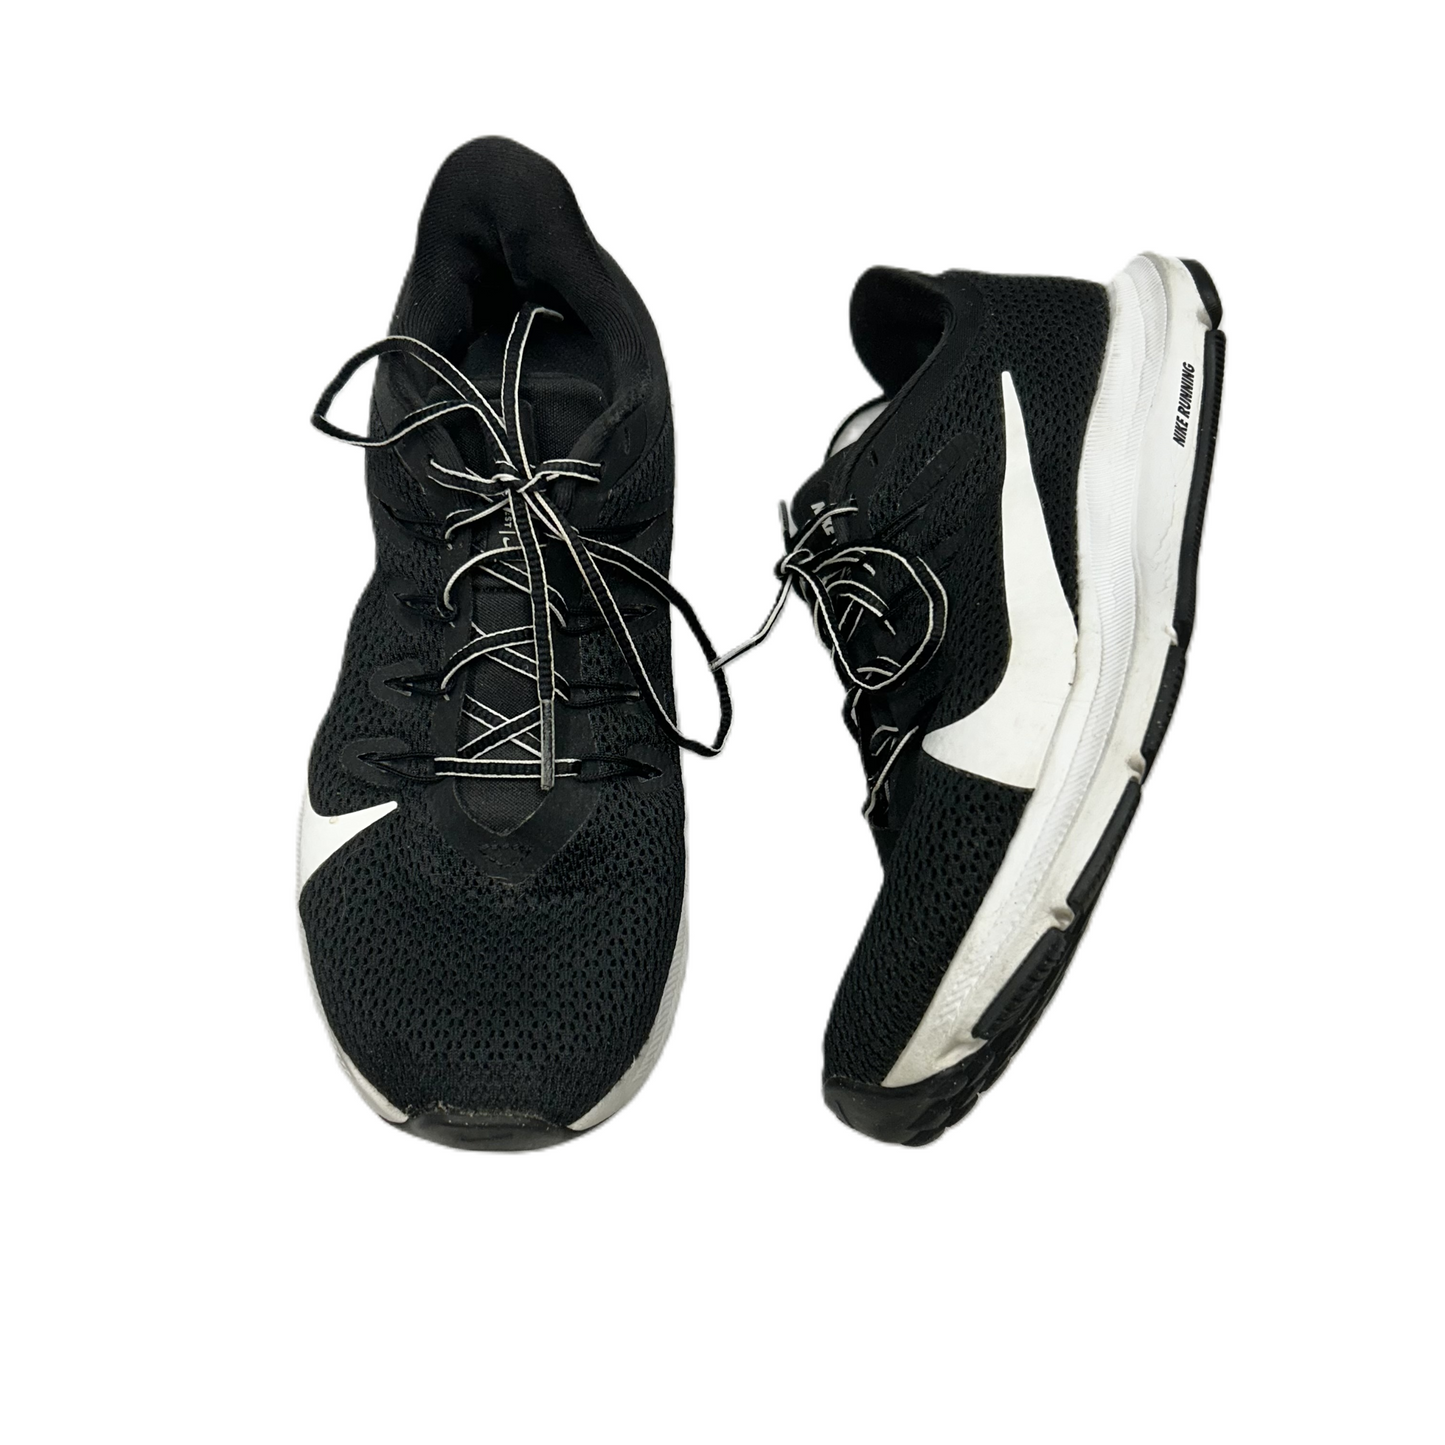 Black Shoes Athletic By Nike, Size: 7